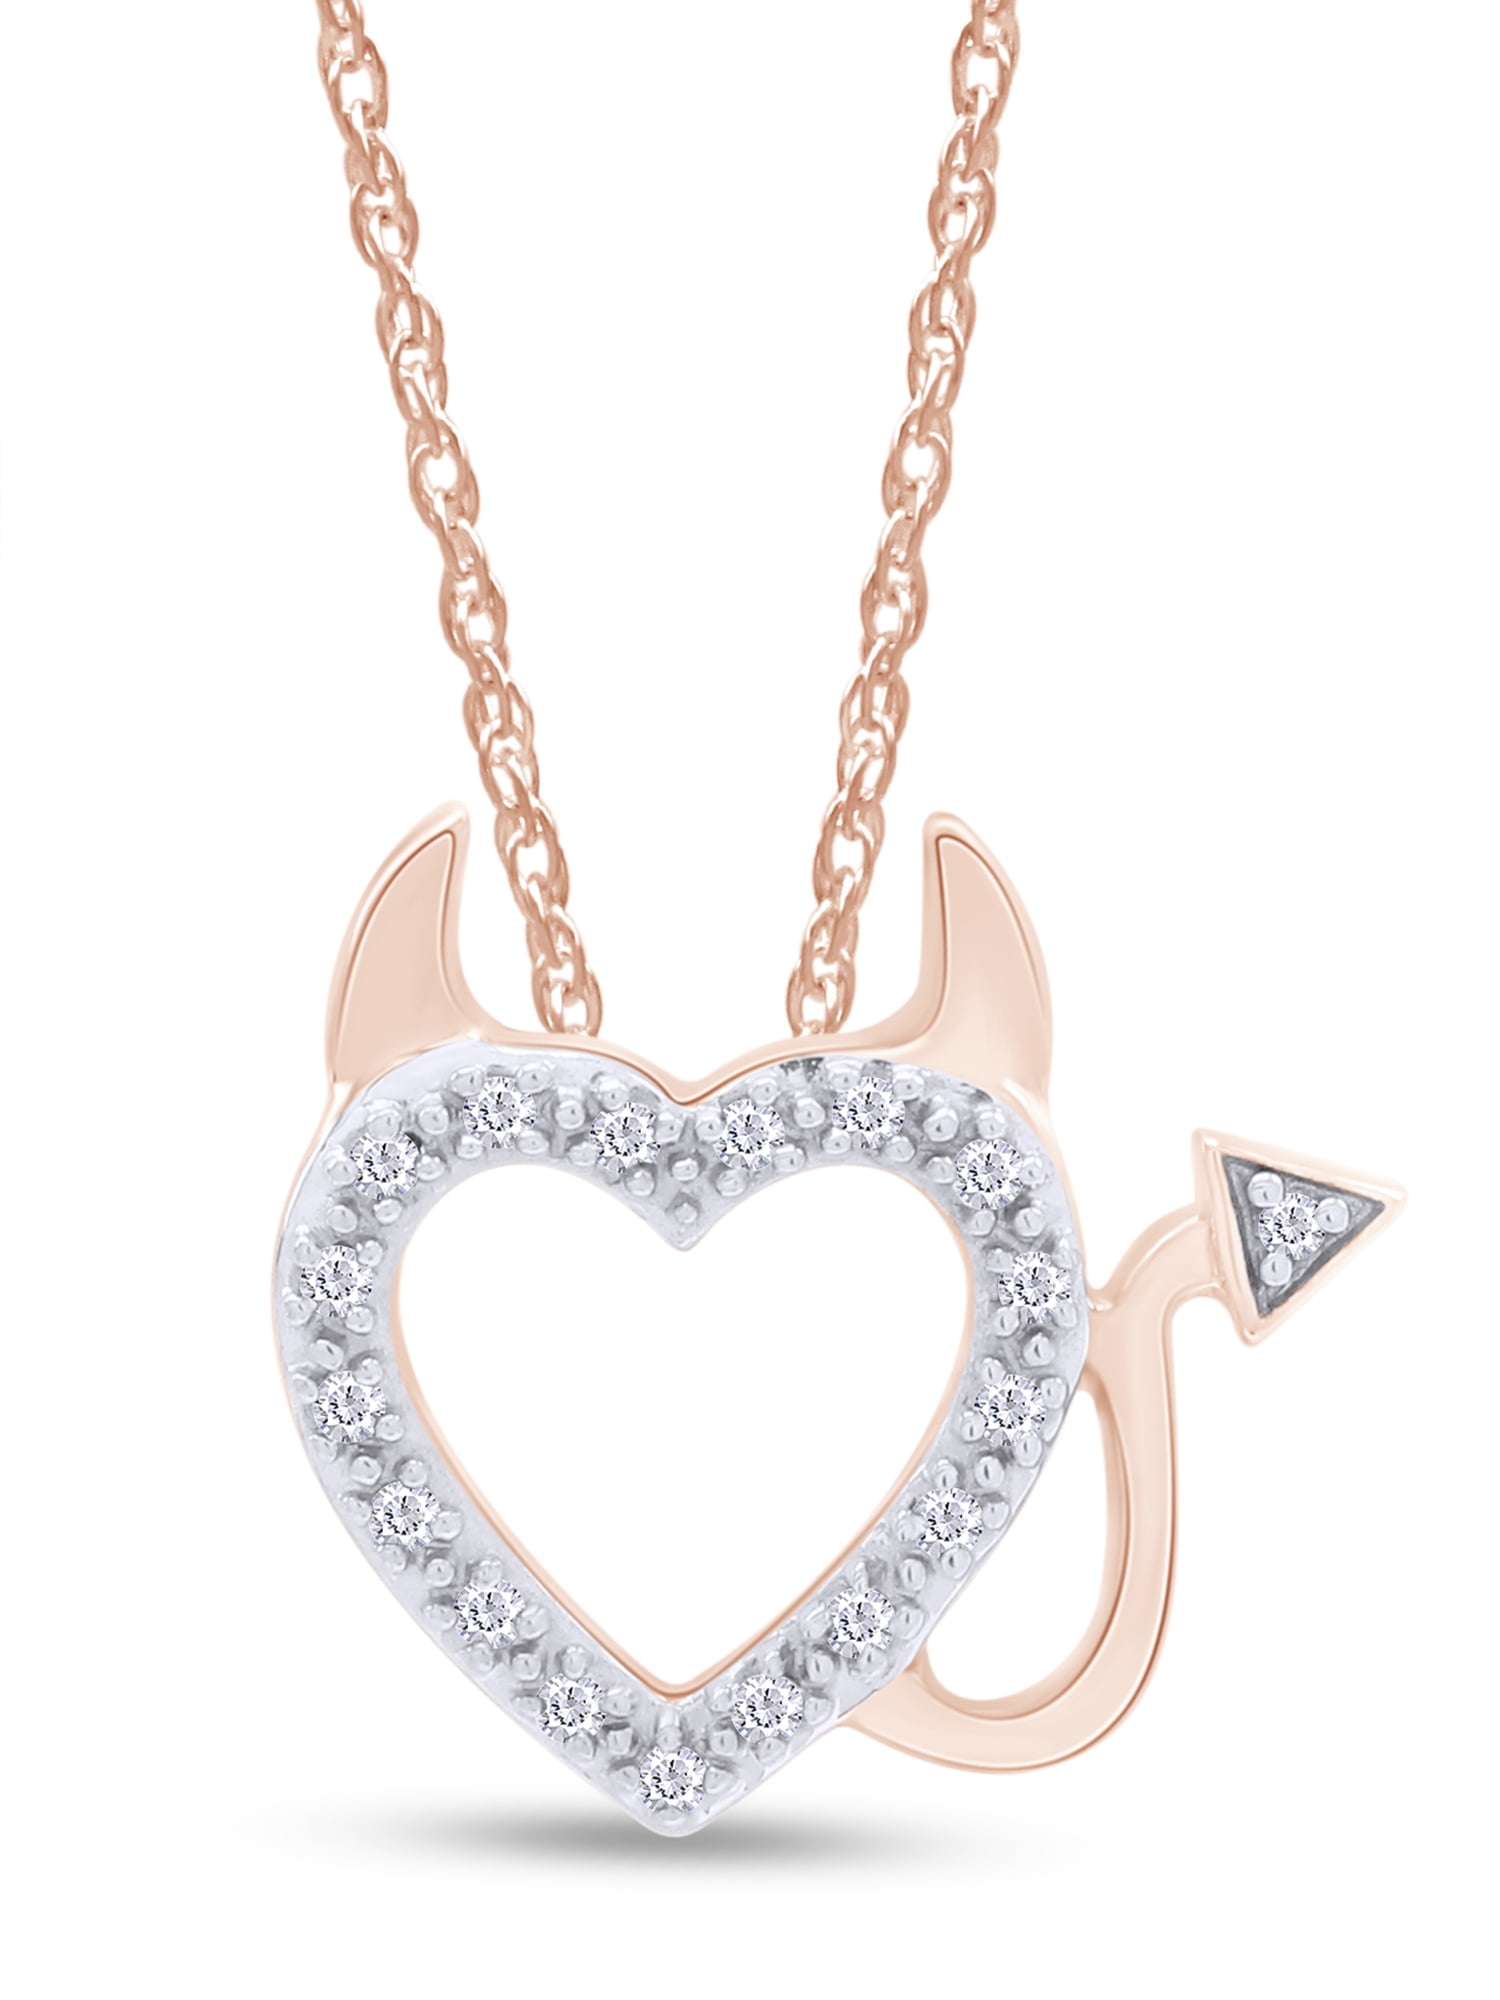 Diamond Heart 18" Necklace In 14K Rose Gold/Sterling Silver 